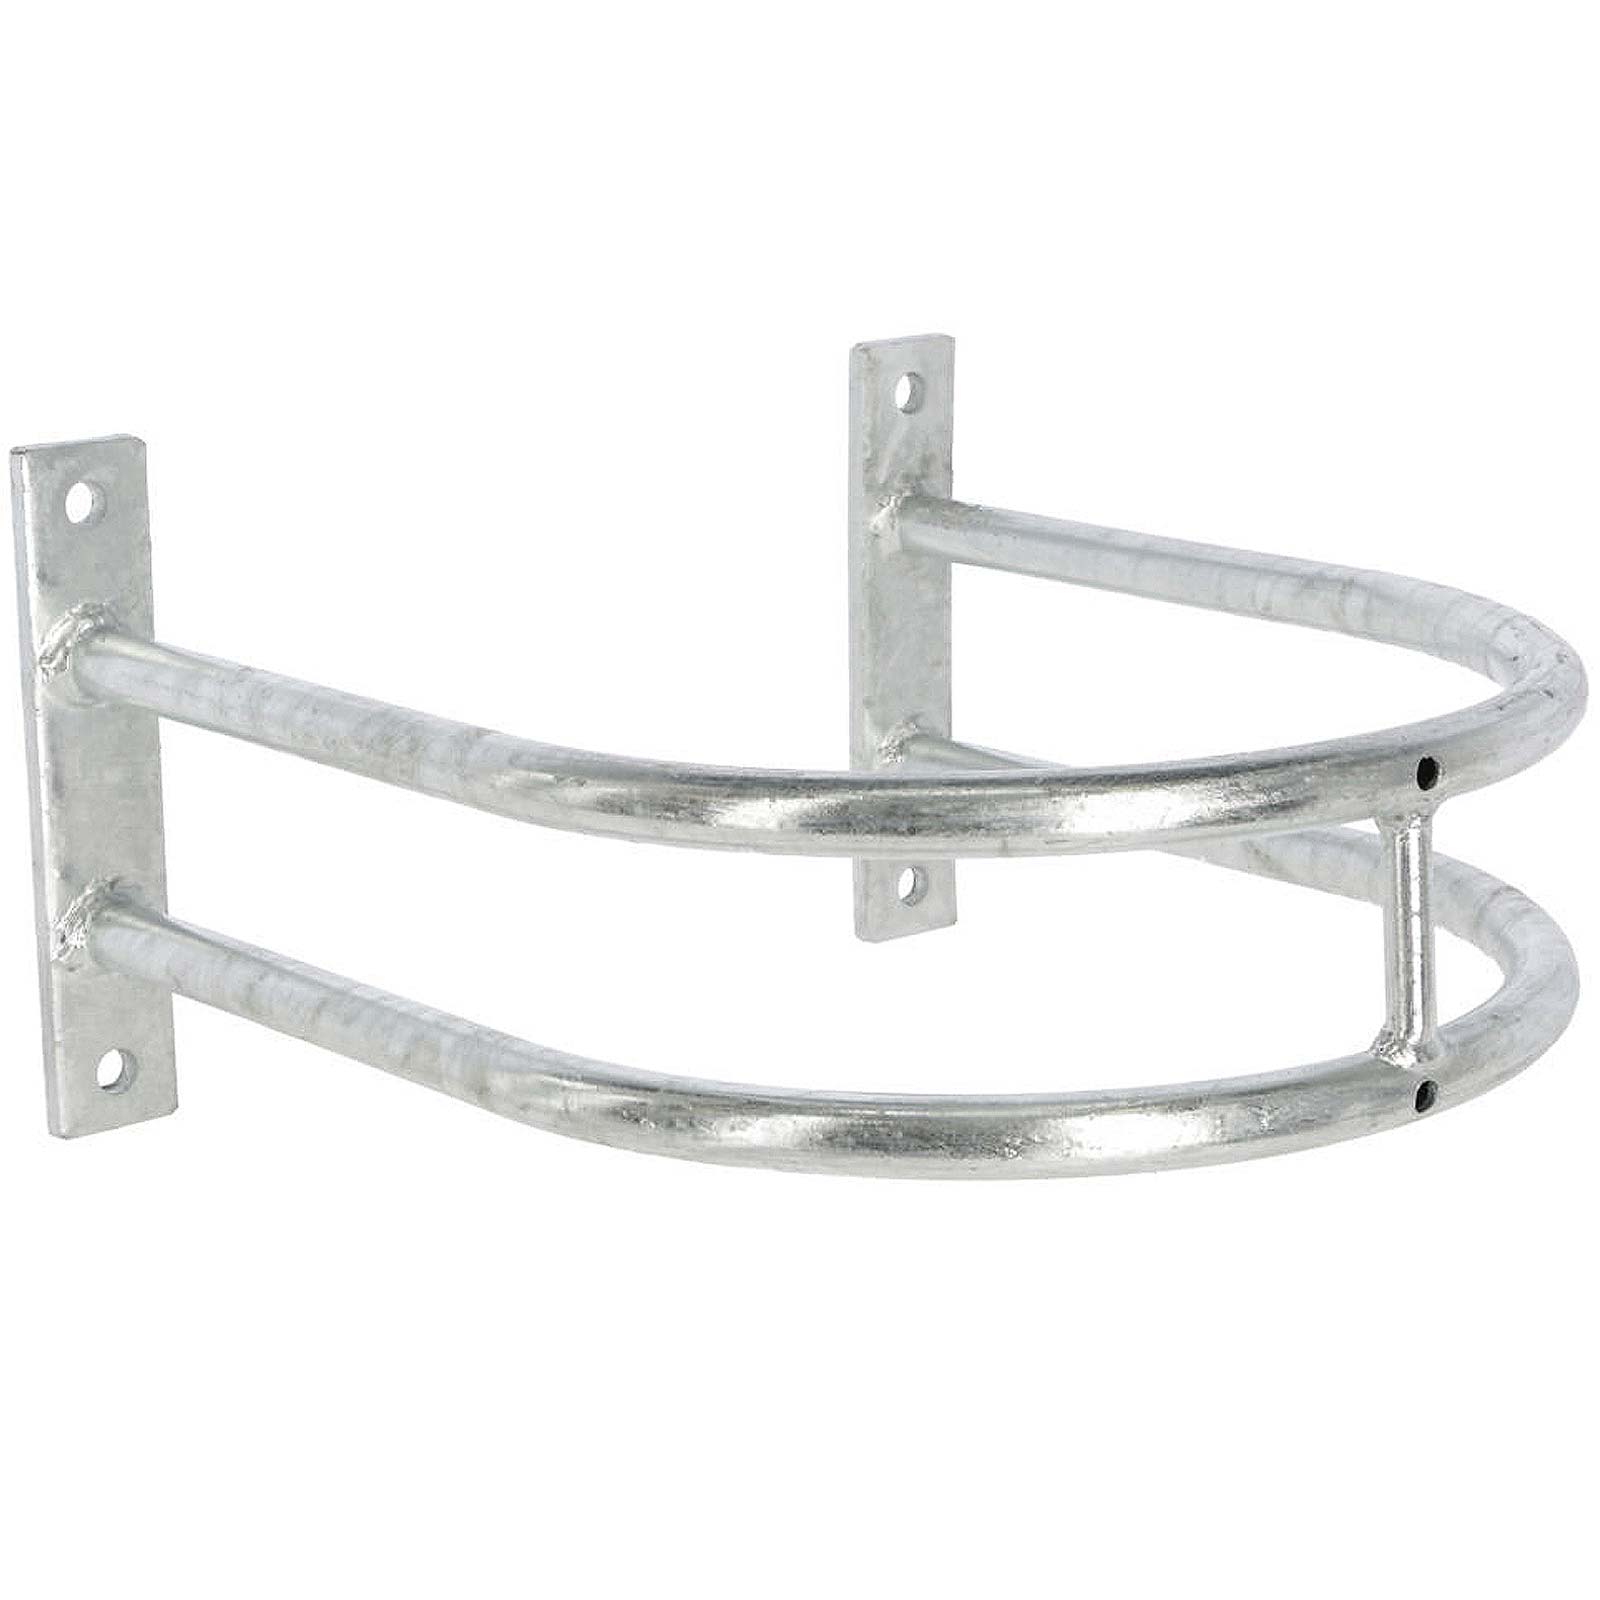 Protection Bracket for Water Bowls